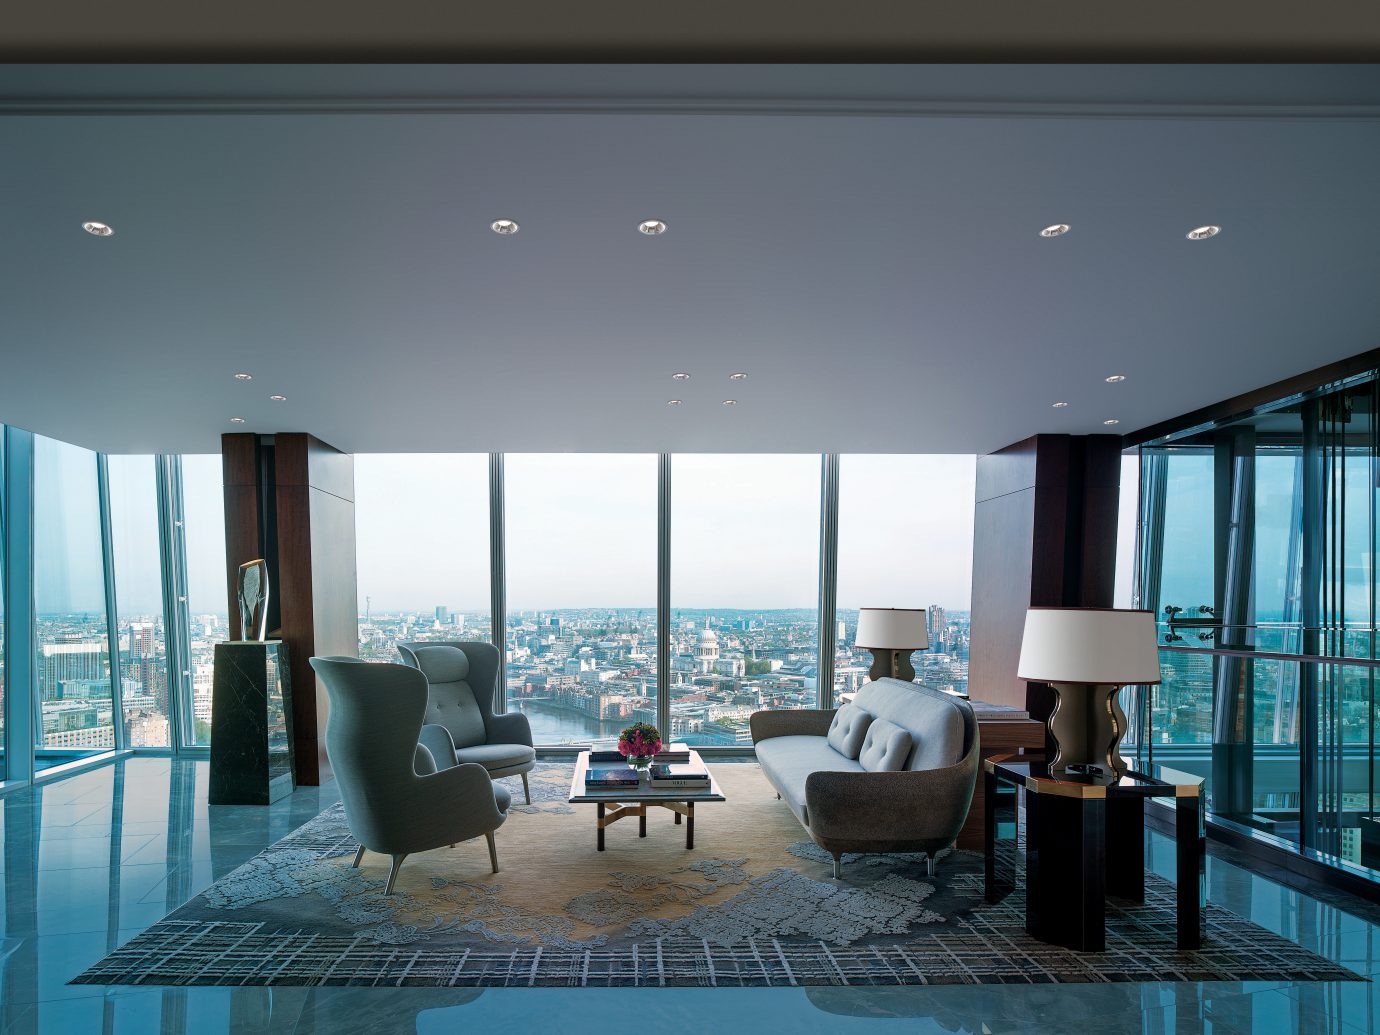 City Hotels Living Lounge Luxury Travel Modern Scenic views indoor room floor property ceiling condominium Architecture estate living room interior design swimming pool furniture lighting home daylighting Lobby Design dining room apartment window covering headquarters window area flat several